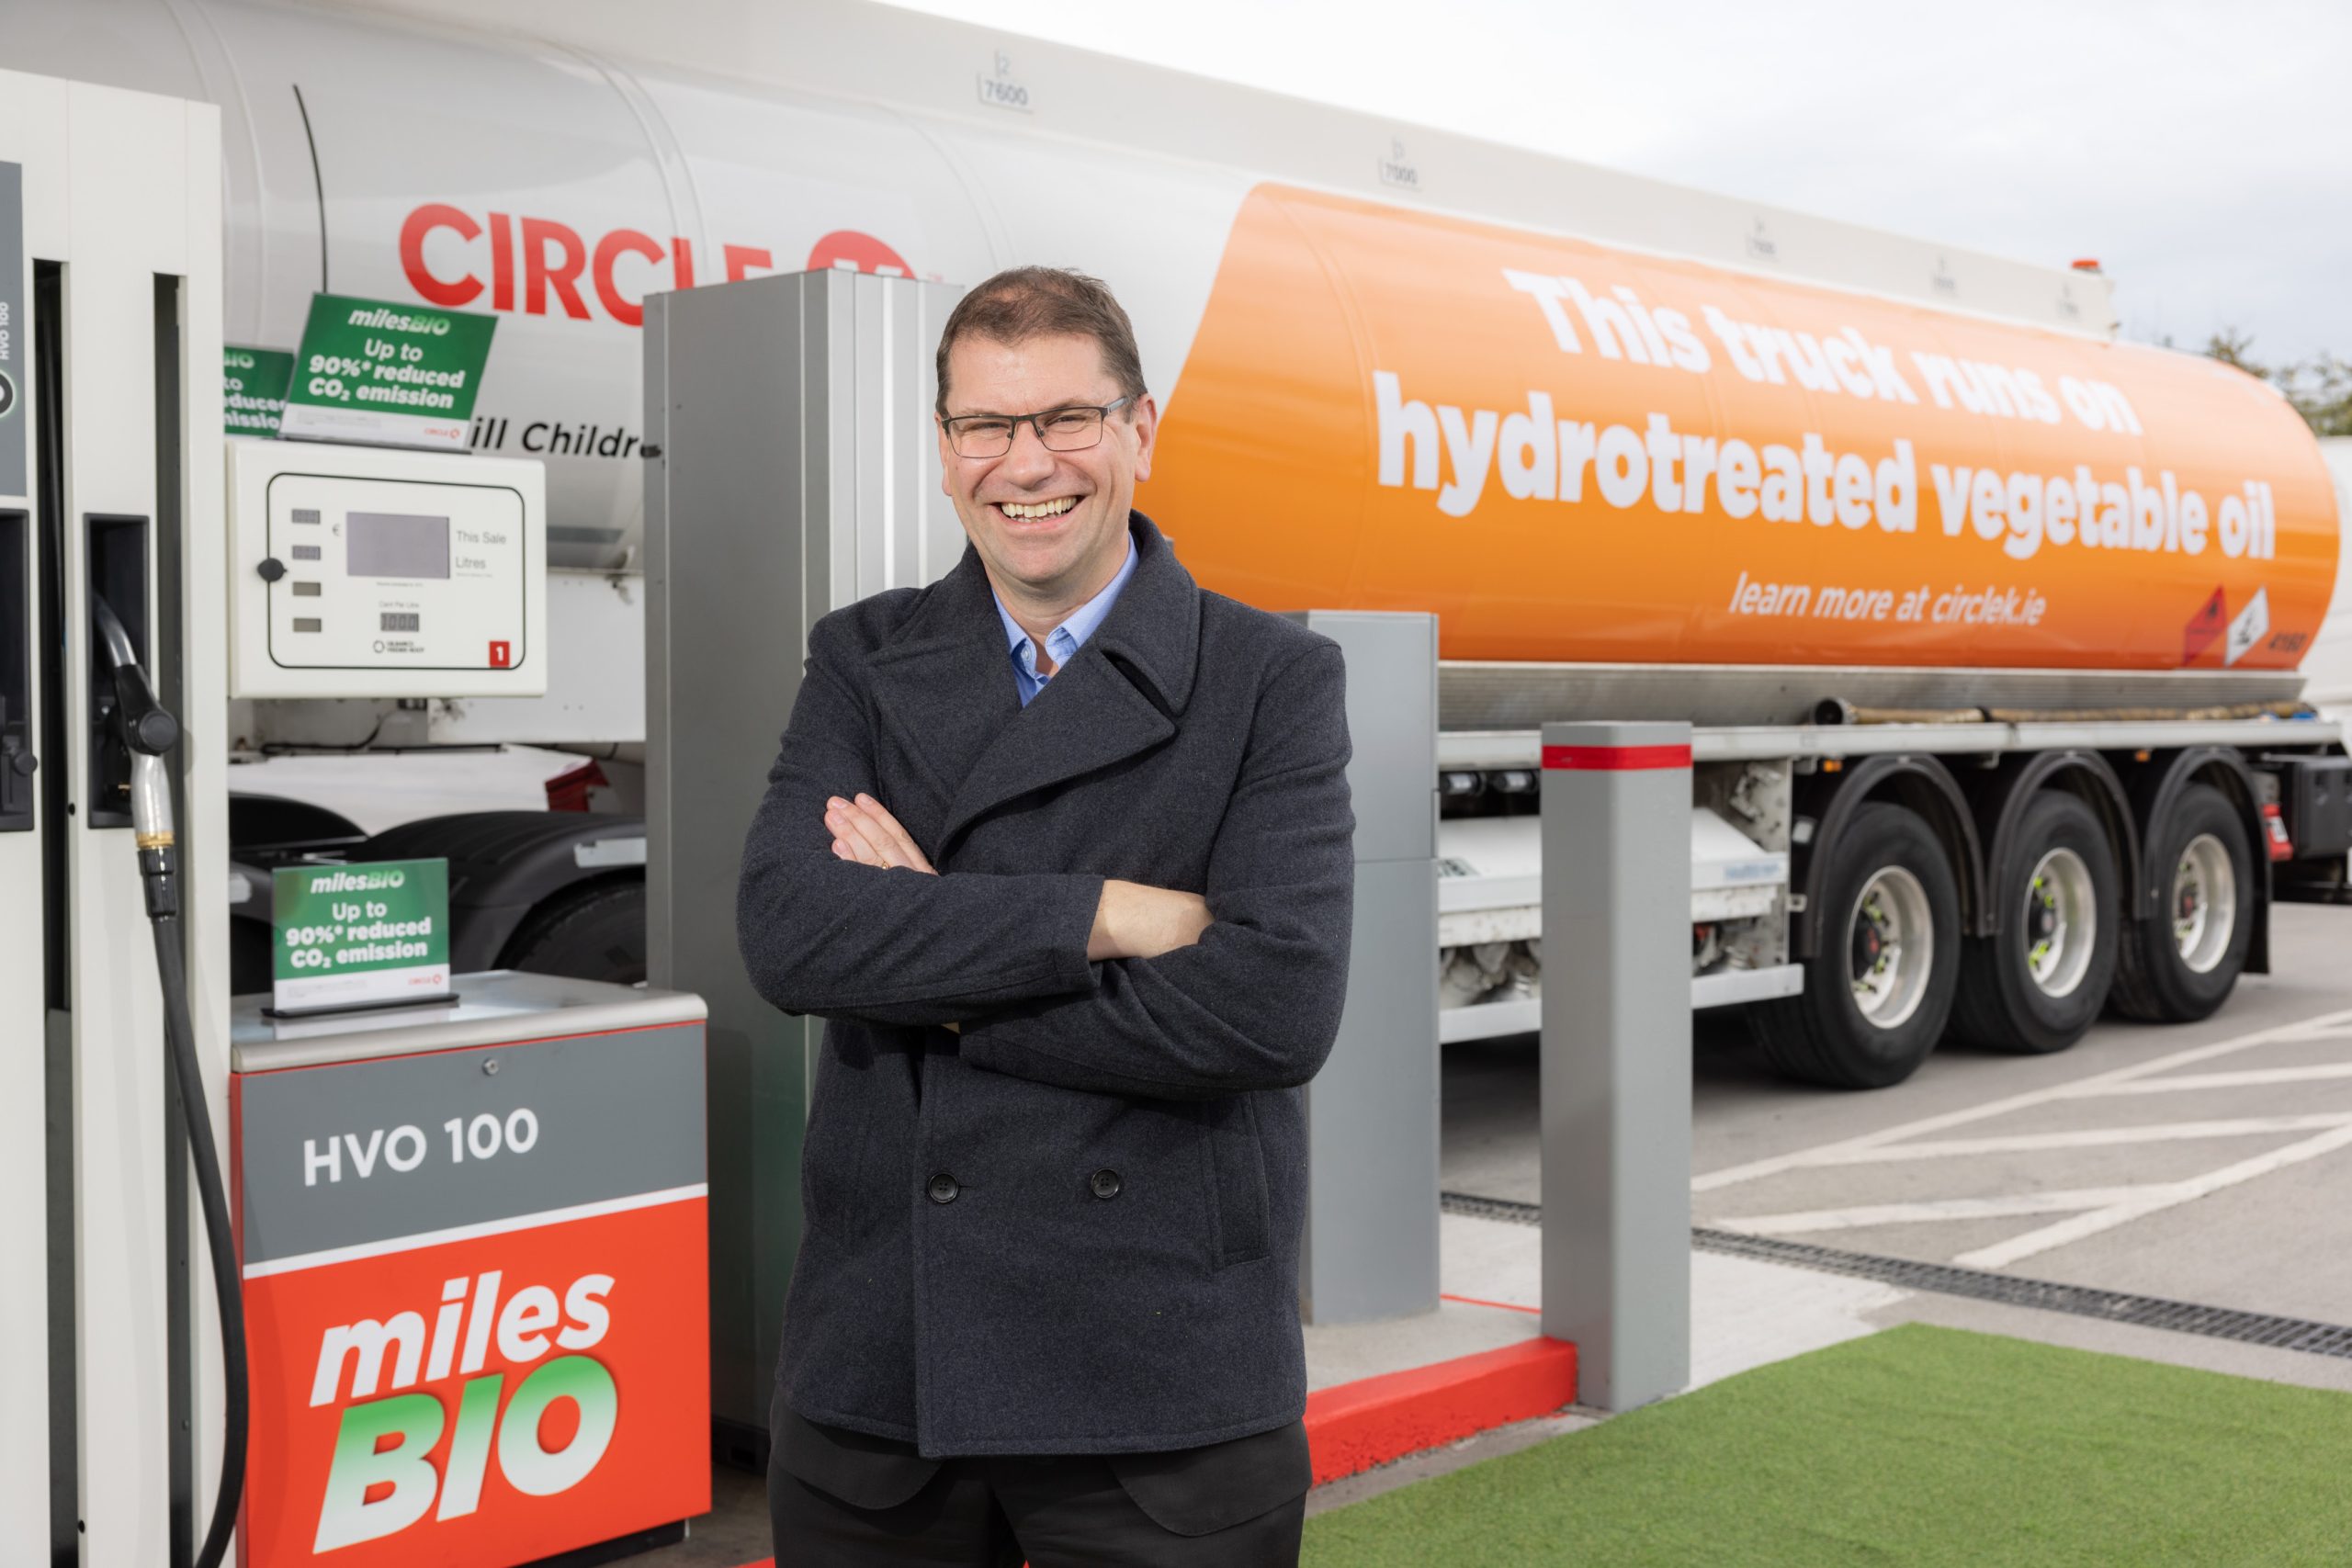 Circle K Ireland’s delivery fleet to be fuelled by 100% HVO renewable diesel